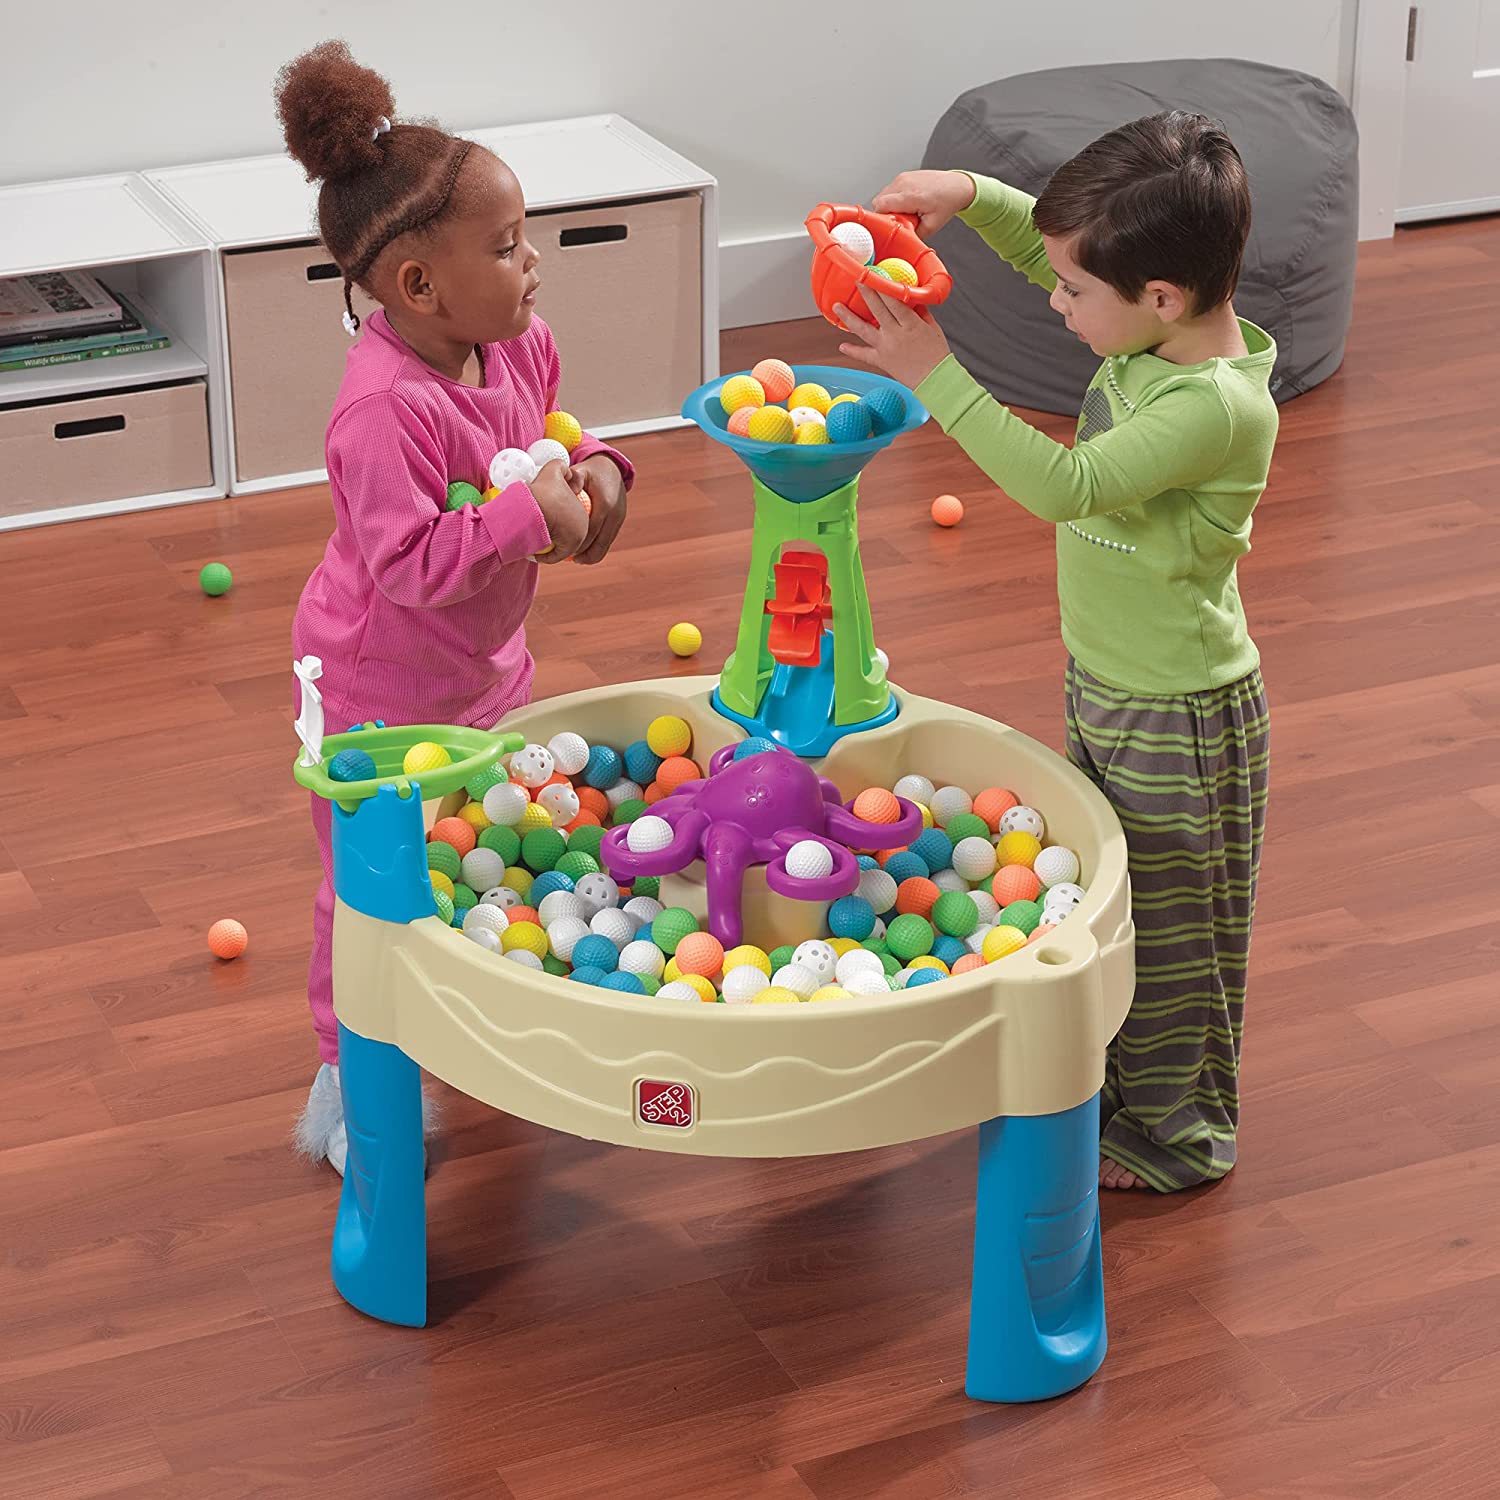 Step2 Wild Whirlpool Water Table Sand & Water Play Toy for Kids